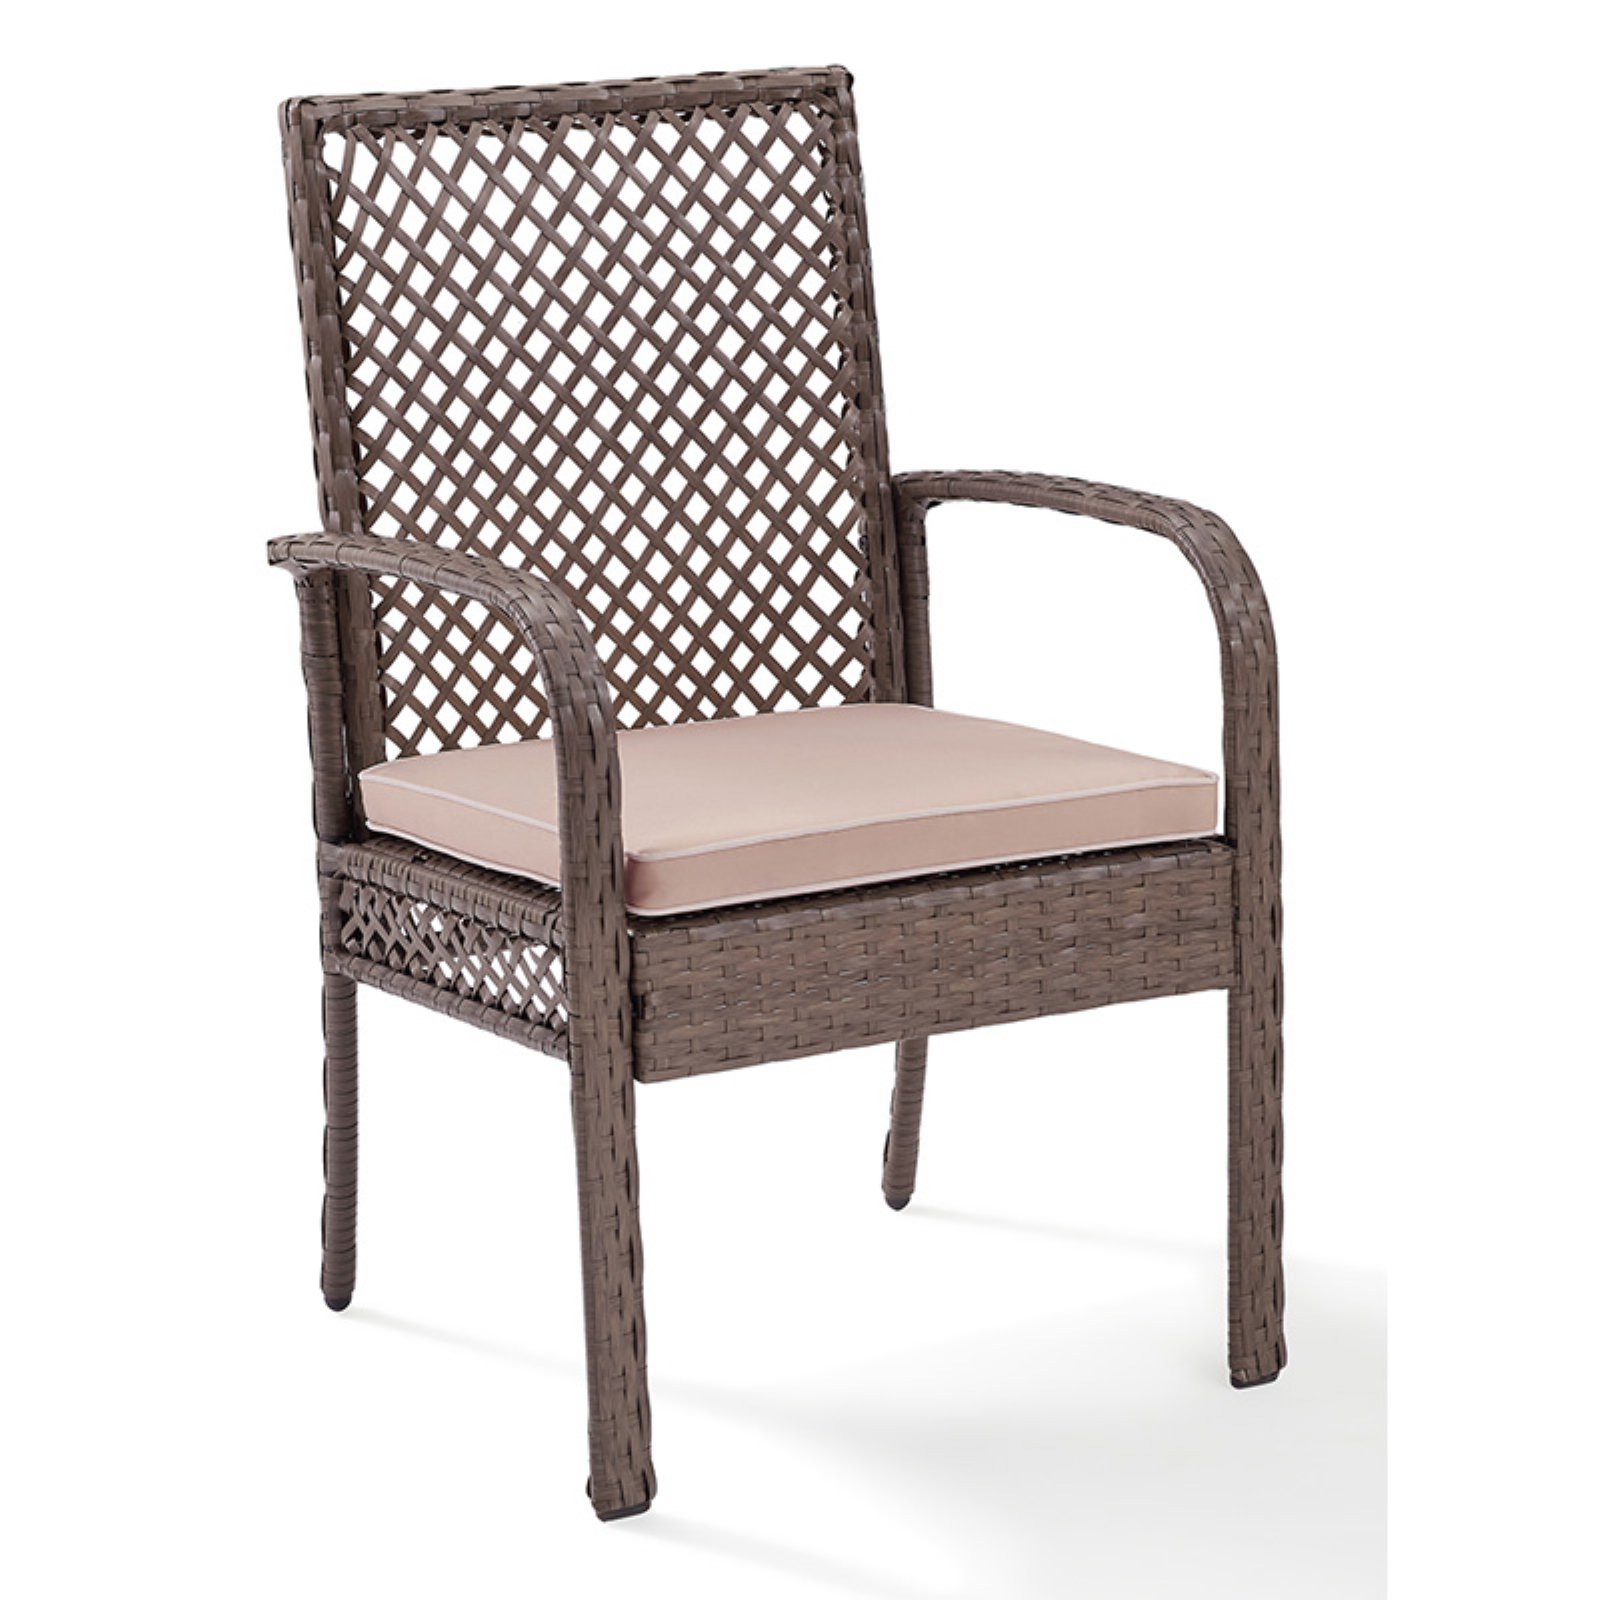 Crosley Furniture Tribeca Wicker Patio Dining Arm Chair in Driftwood - image 1 of 6